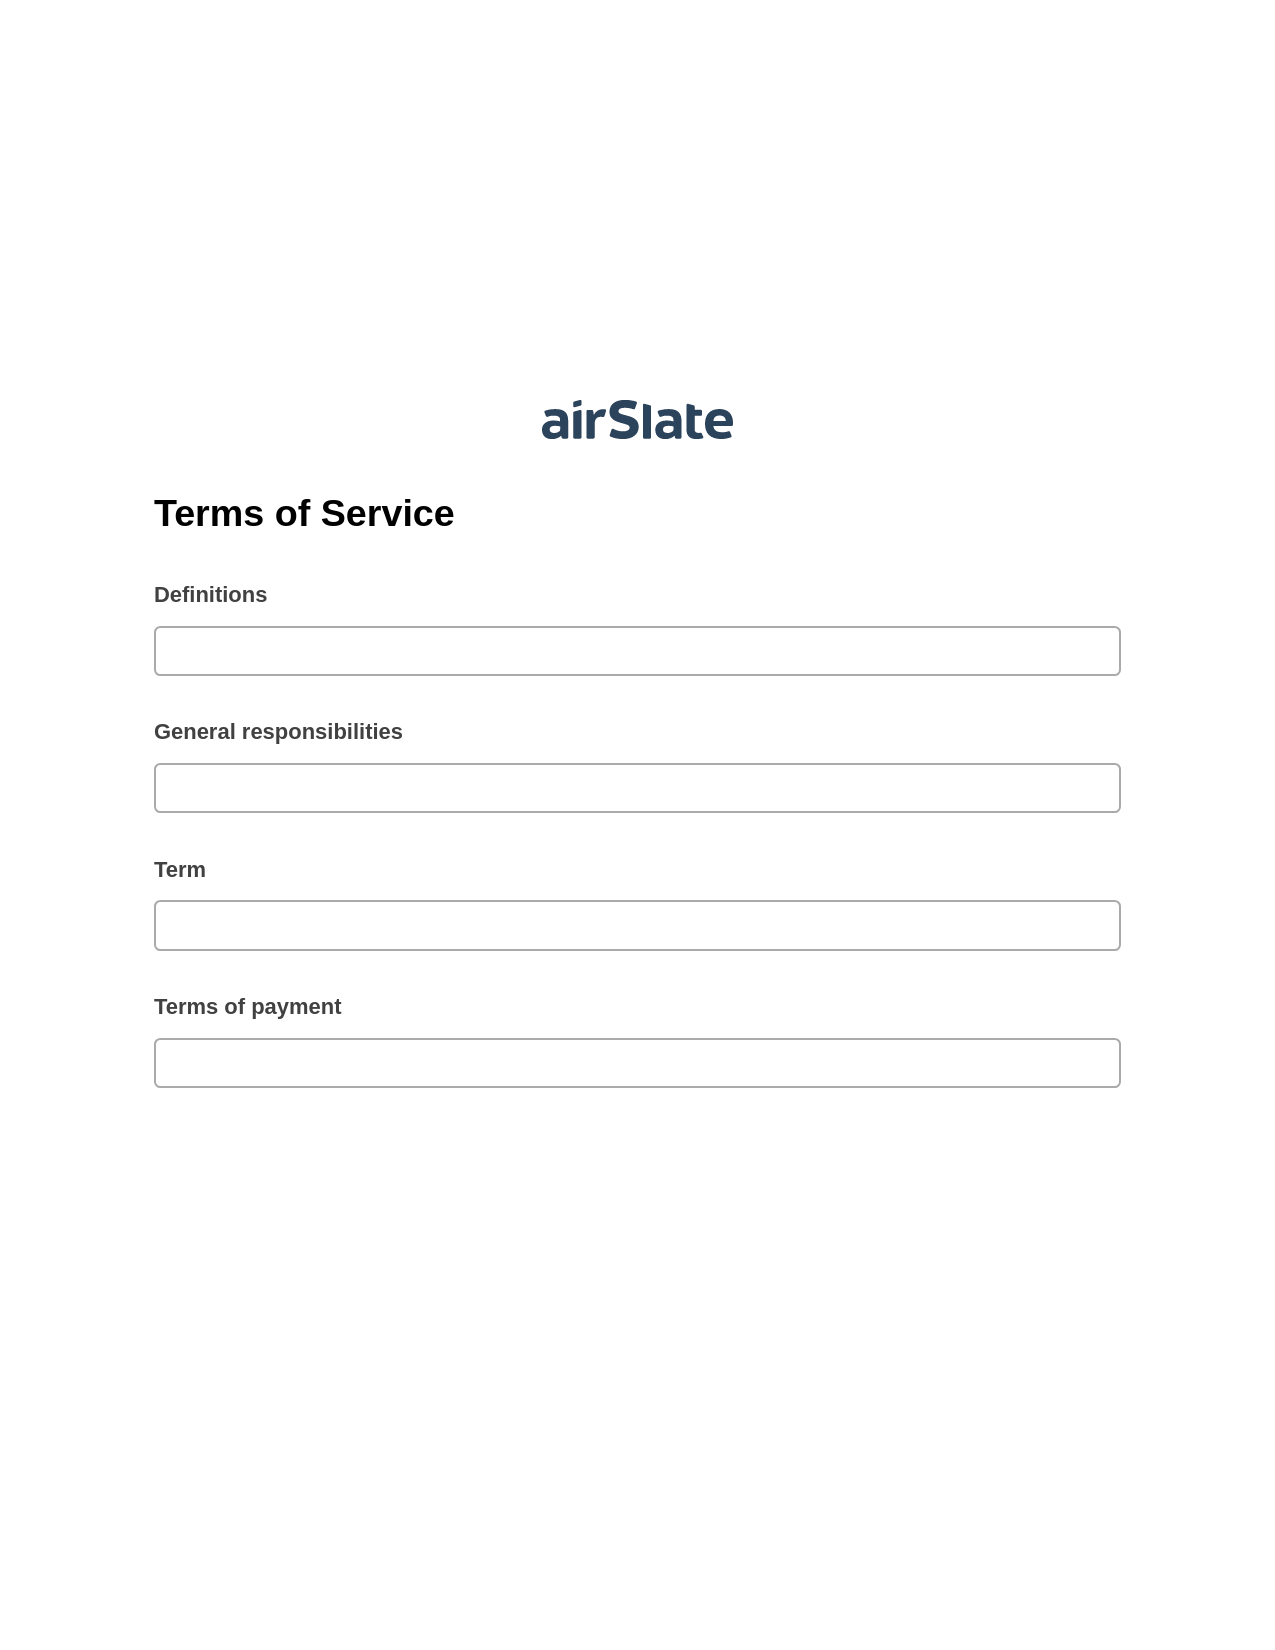 Terms of Service Pre-fill Slate from MS Dynamics 365 Records Bot, Remove Slate Bot, Export to NetSuite Record Bot